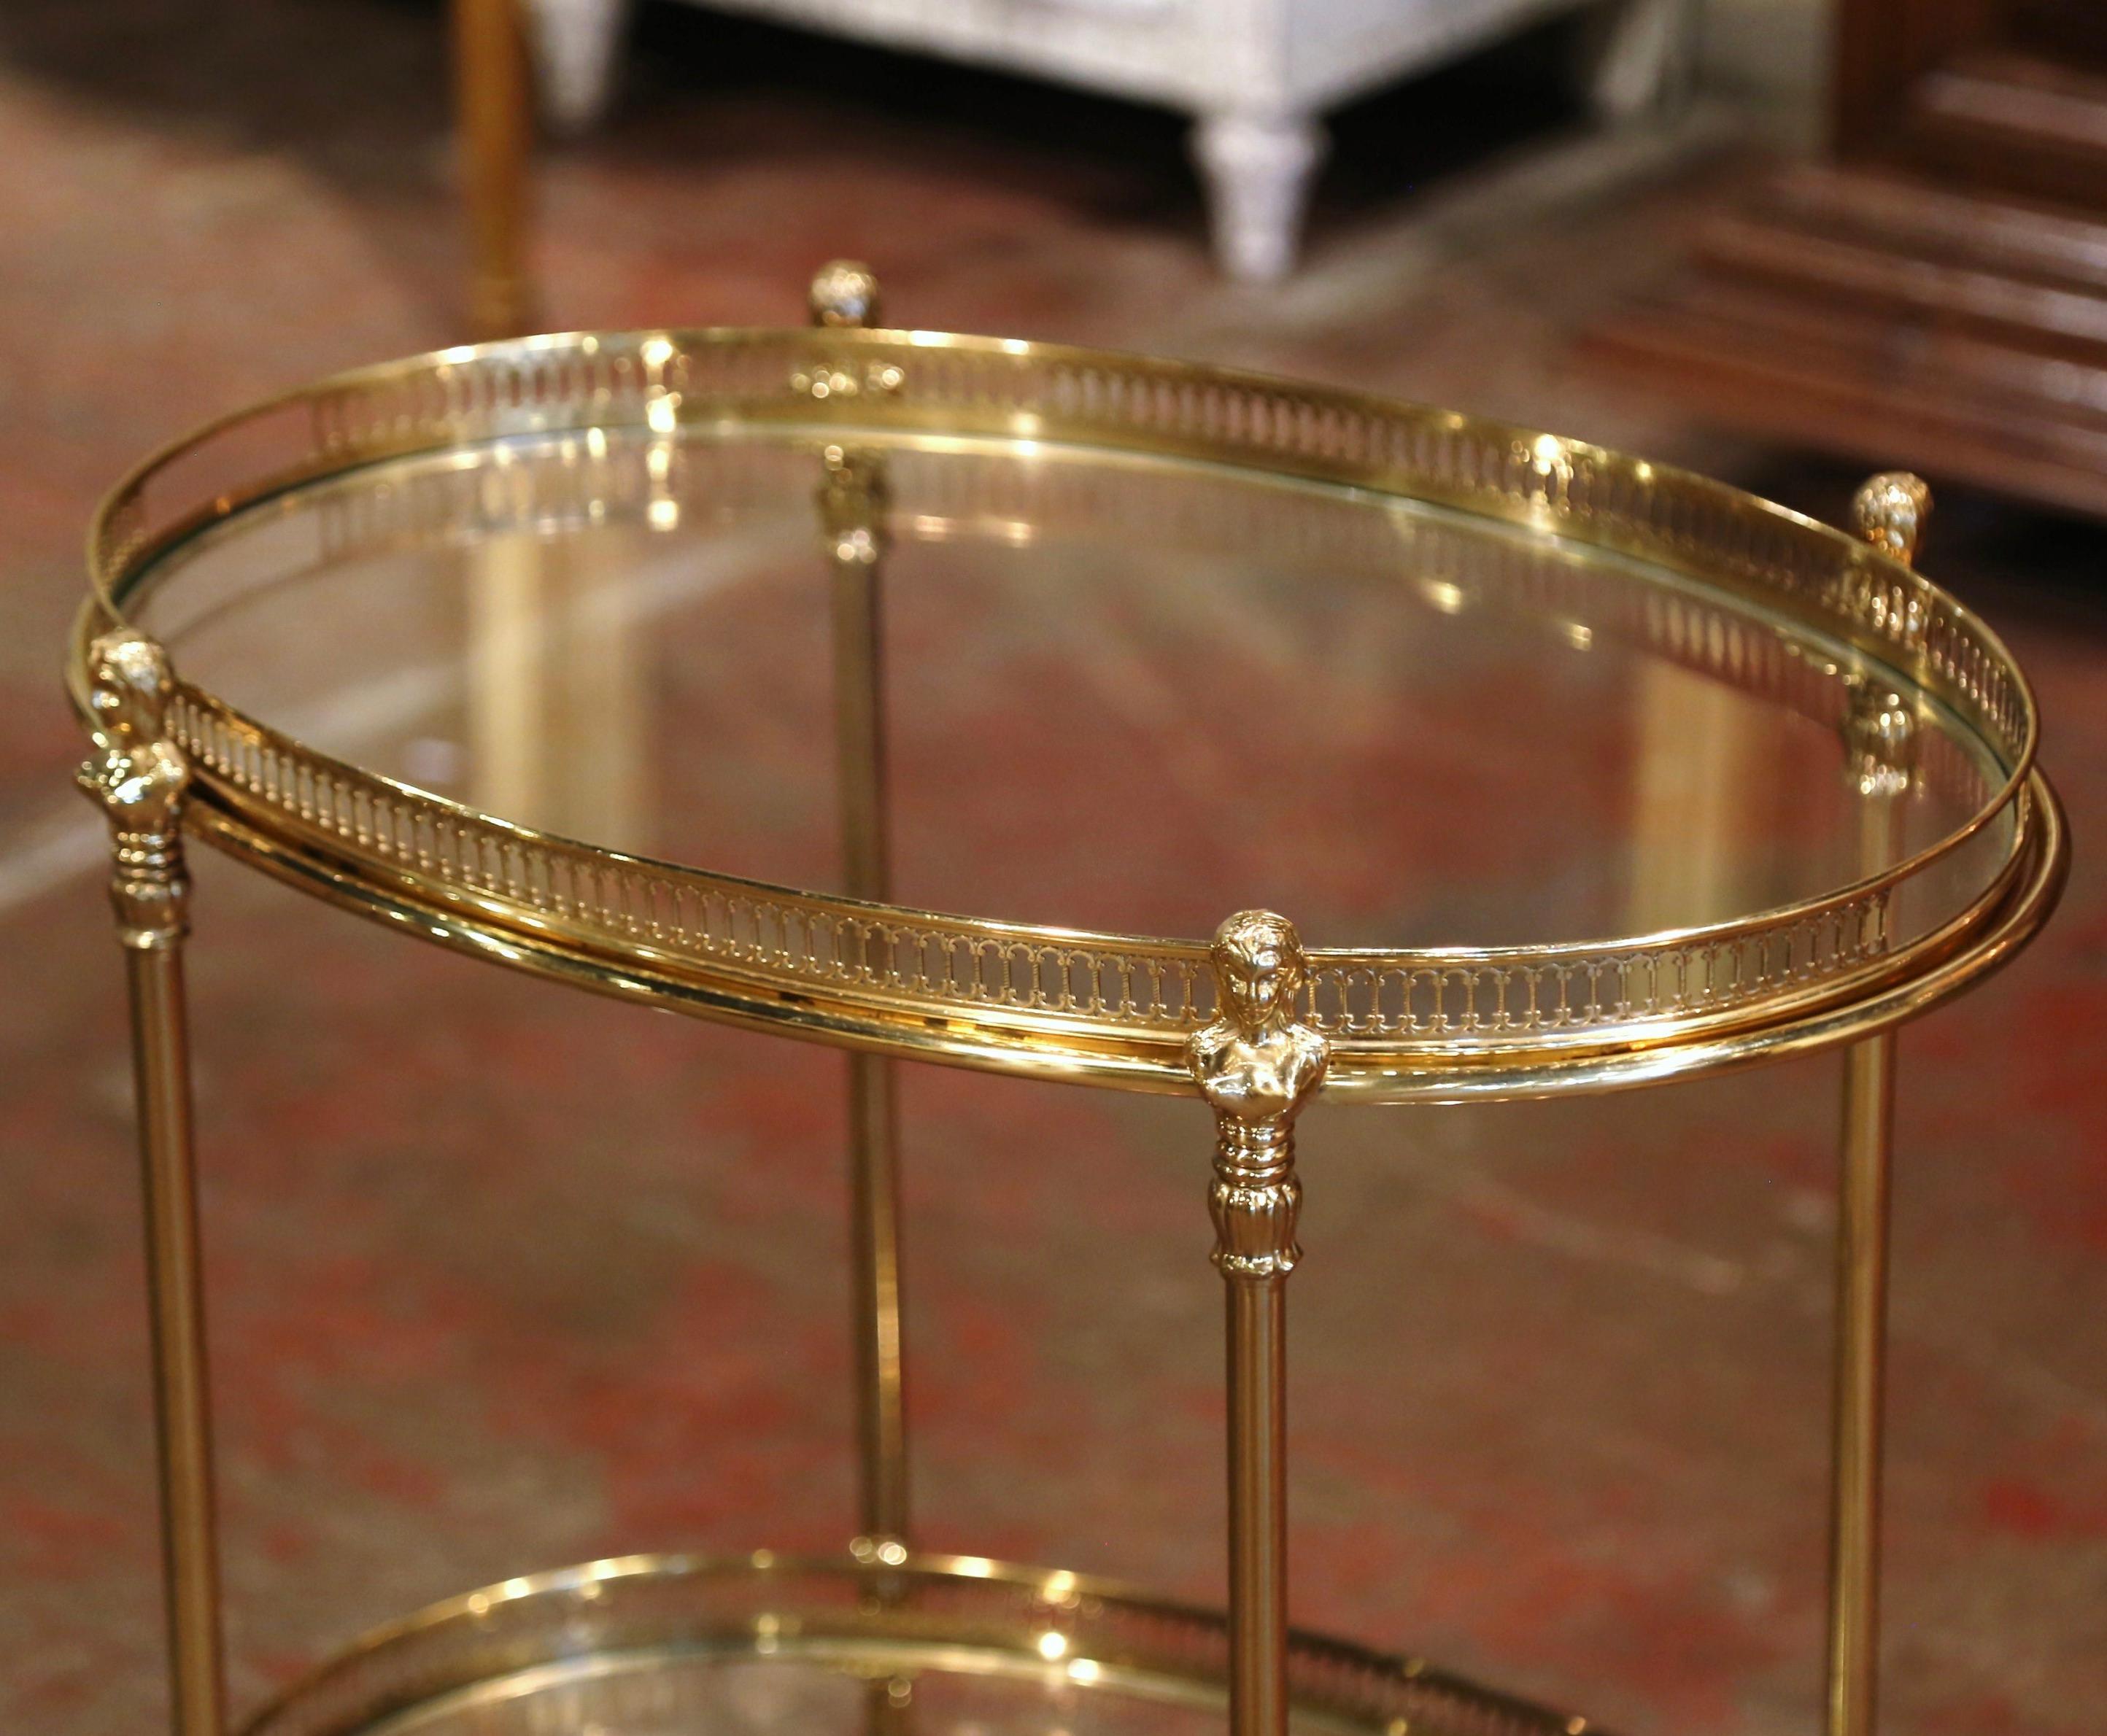 Art Deco Midcentury French Polished Brass Dessert Table or Bar Cart on Rubber Wheels